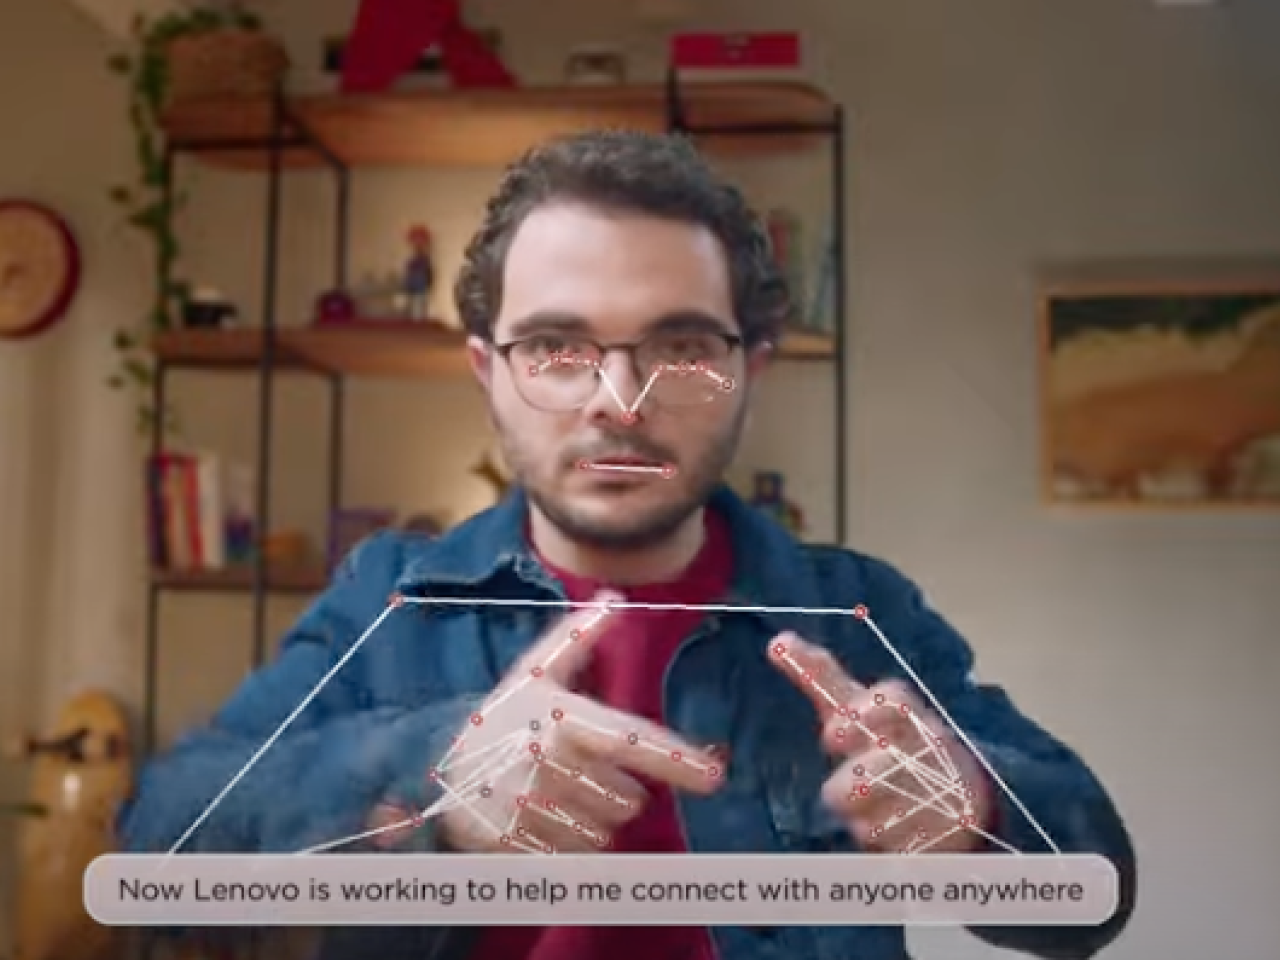 "Now Lenovo is working to help me connect with anyone anywhere"